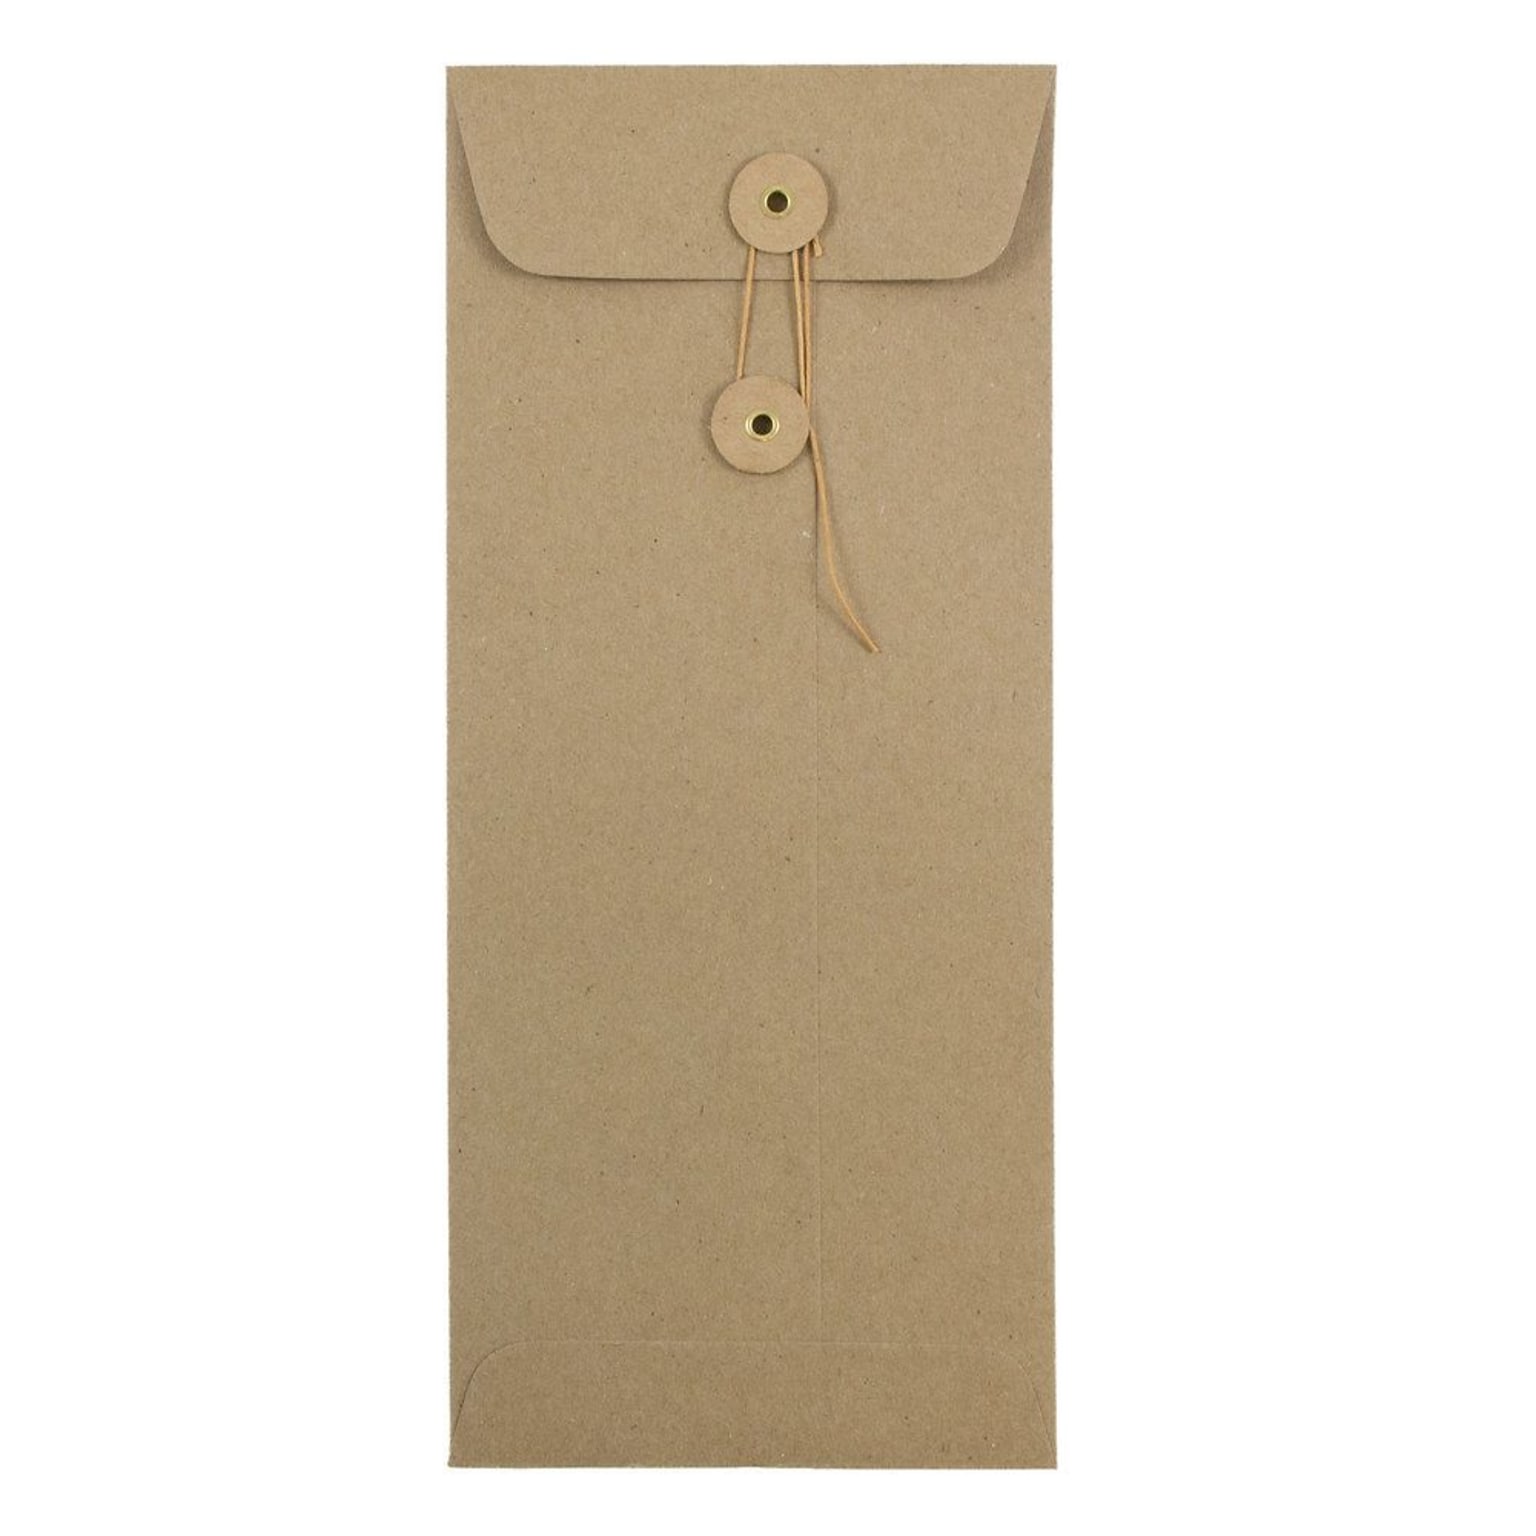 JAM Paper #10 Policy Envelopes with Button and String Closure, 4 1/8 x 9 1/2, Brown Kraft Paper Bag, 25/Pack (41266941)